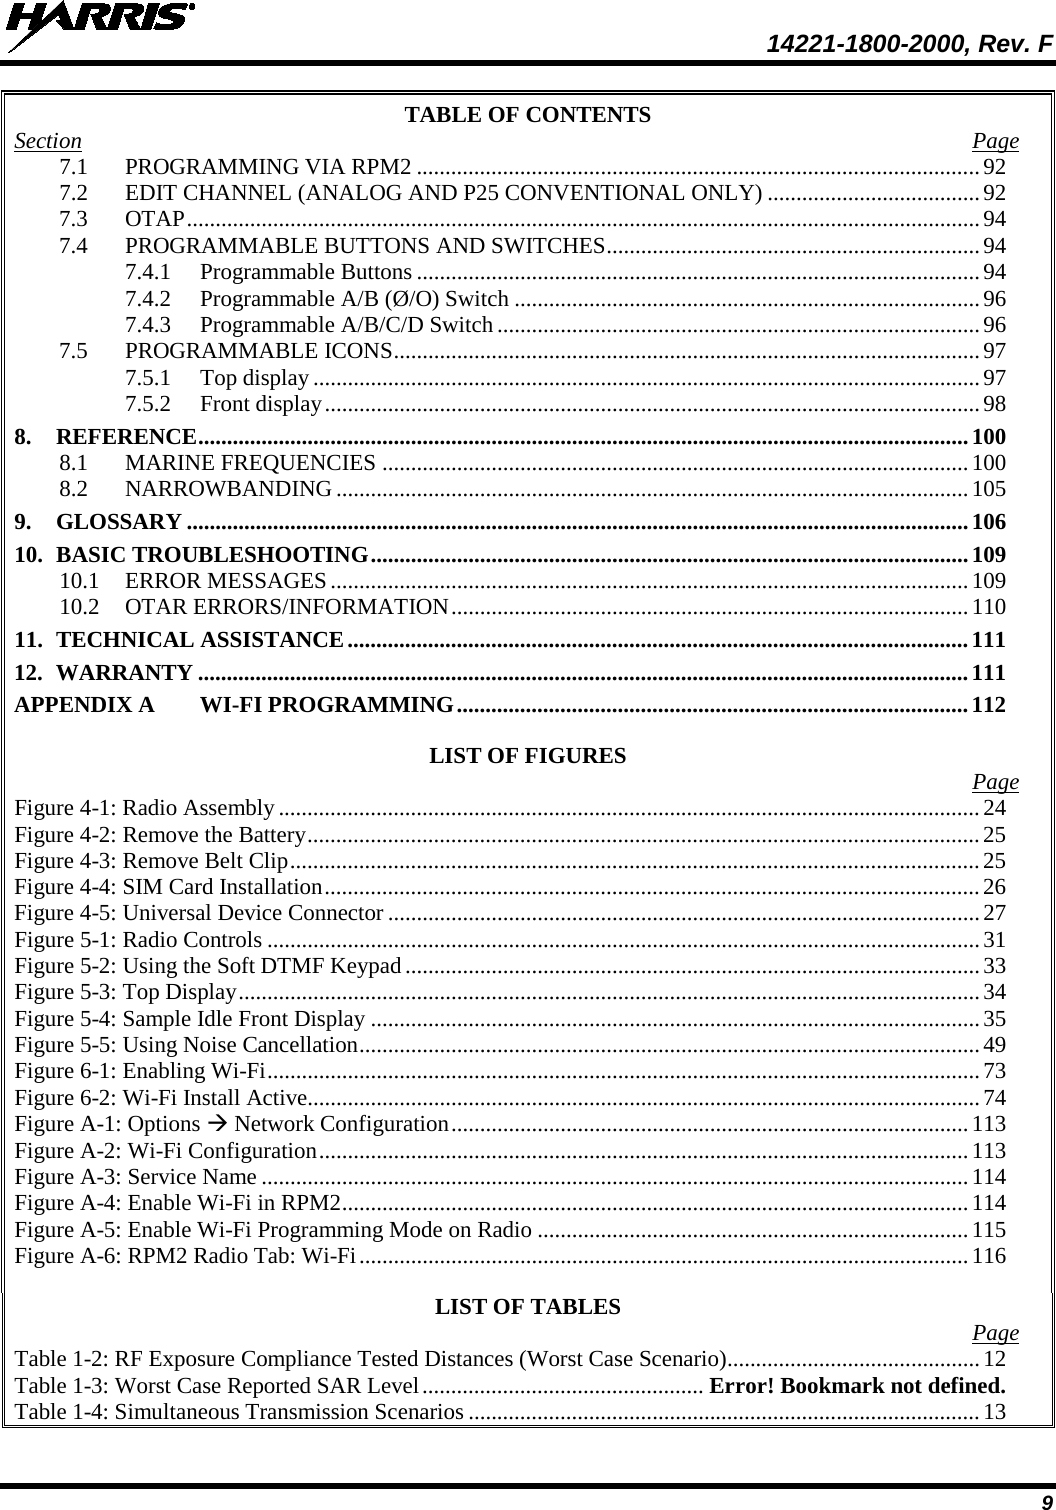  14221-1800-2000, Rev. F 9 TABLE OF CONTENTS Section  Page 7.1 PROGRAMMING VIA RPM2 .................................................................................................. 92 7.2 EDIT CHANNEL (ANALOG AND P25 CONVENTIONAL ONLY) ..................................... 92 7.3 OTAP .......................................................................................................................................... 94 7.4 PROGRAMMABLE BUTTONS AND SWITCHES ................................................................. 94 7.4.1 Programmable Buttons .................................................................................................. 94 7.4.2 Programmable A/B (Ø/O) Switch ................................................................................. 96 7.4.3 Programmable A/B/C/D Switch .................................................................................... 96 7.5 PROGRAMMABLE ICONS ...................................................................................................... 97 7.5.1 Top display .................................................................................................................... 97 7.5.2 Front display .................................................................................................................. 98 8. REFERENCE ...................................................................................................................................... 100 8.1 MARINE FREQUENCIES ...................................................................................................... 100 8.2 NARROWBANDING .............................................................................................................. 105 9. GLOSSARY ........................................................................................................................................ 106 10. BASIC TROUBLESHOOTING ........................................................................................................ 109 10.1 ERROR MESSAGES ............................................................................................................... 109 10.2 OTAR ERRORS/INFORMATION .......................................................................................... 110 11. TECHNICAL ASSISTANCE ............................................................................................................ 111 12. WARRANTY ...................................................................................................................................... 111 APPENDIX A WI-FI PROGRAMMING ......................................................................................... 112  LIST OF FIGURES   Page Figure 4-1: Radio Assembly .......................................................................................................................... 24 Figure 4-2: Remove the Battery ..................................................................................................................... 25 Figure 4-3: Remove Belt Clip ........................................................................................................................ 25 Figure 4-4: SIM Card Installation .................................................................................................................. 26 Figure 4-5: Universal Device Connector ....................................................................................................... 27 Figure 5-1: Radio Controls ............................................................................................................................ 31 Figure 5-2: Using the Soft DTMF Keypad .................................................................................................... 33 Figure 5-3: Top Display ................................................................................................................................. 34 Figure 5-4: Sample Idle Front Display .......................................................................................................... 35 Figure 5-5: Using Noise Cancellation ............................................................................................................ 49 Figure 6-1: Enabling Wi-Fi ............................................................................................................................ 73 Figure 6-2: Wi-Fi Install Active ..................................................................................................................... 74 Figure A-1: Options  Network Configuration .......................................................................................... 113 Figure A-2: Wi-Fi Configuration ................................................................................................................. 113 Figure A-3: Service Name ........................................................................................................................... 114 Figure A-4: Enable Wi-Fi in RPM2 ............................................................................................................. 114 Figure A-5: Enable Wi-Fi Programming Mode on Radio ........................................................................... 115 Figure A-6: RPM2 Radio Tab: Wi-Fi .......................................................................................................... 116  LIST OF TABLES   Page Table 1-2: RF Exposure Compliance Tested Distances (Worst Case Scenario) ............................................ 12 Table 1-3: Worst Case Reported SAR Level ................................................. Error! Bookmark not defined. Table 1-4: Simultaneous Transmission Scenarios ......................................................................................... 13 